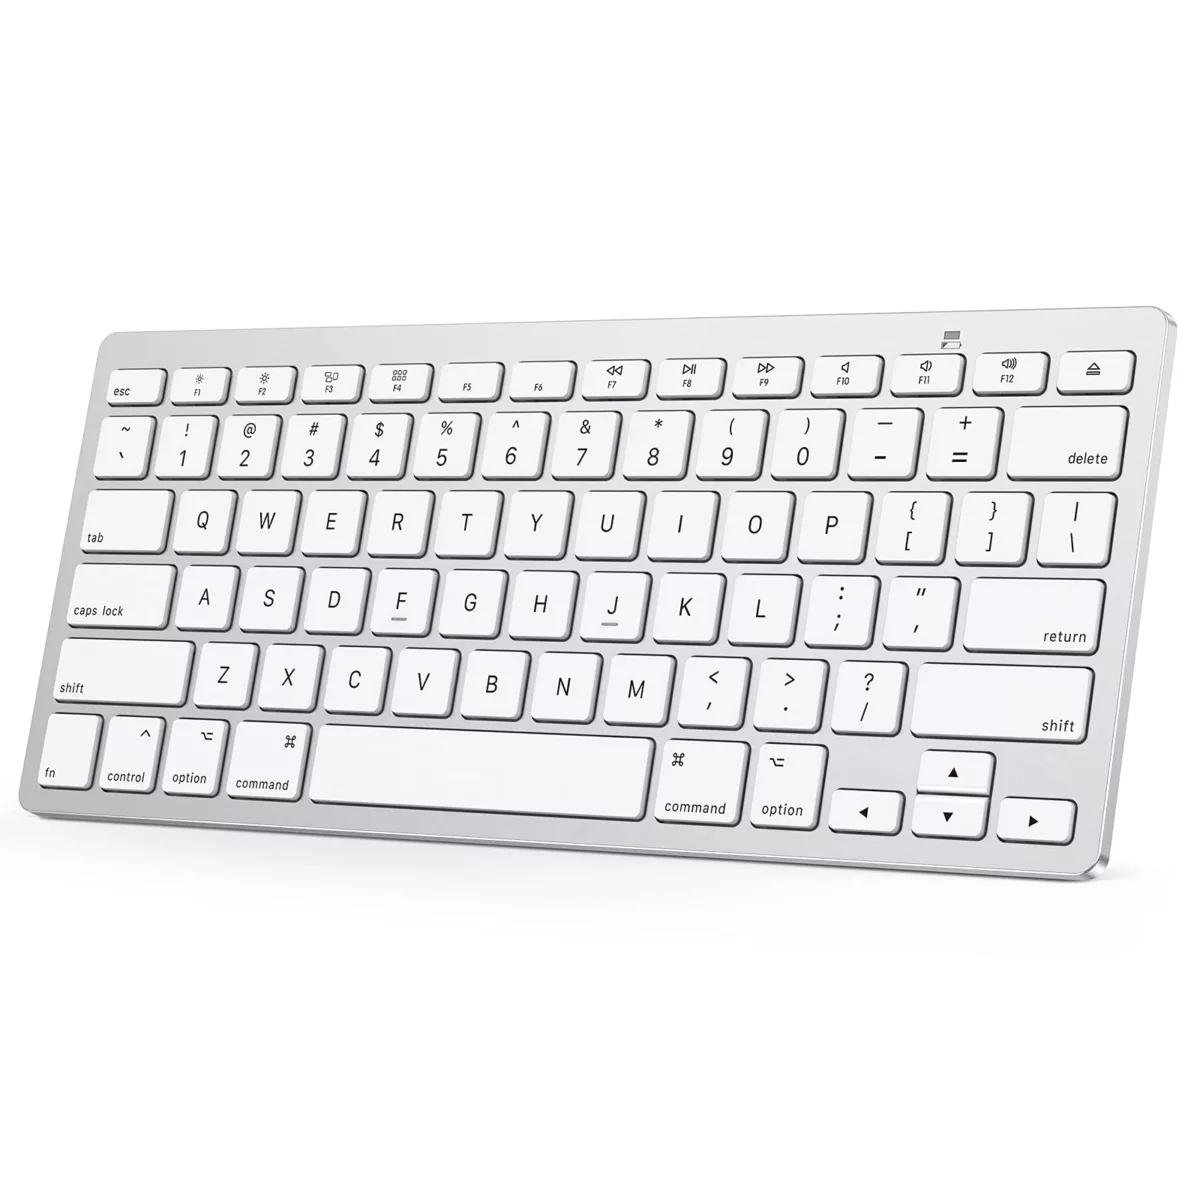 How to Make Your Mac Wireless Keyboard Discoverable? 3